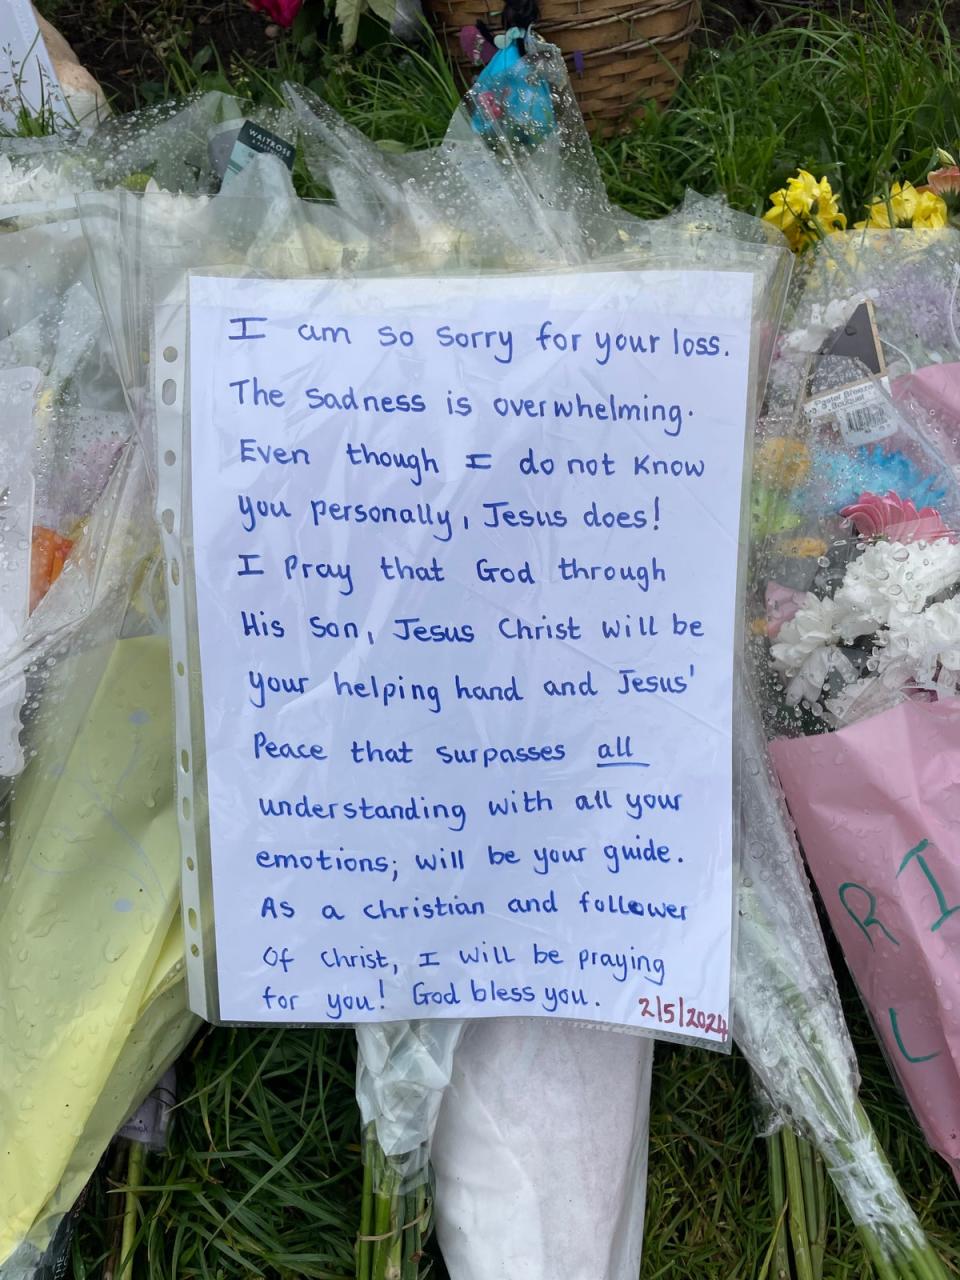 A message on flowers at the scene at the scene in Hainault (Samuel Montgomery/PA Wire)